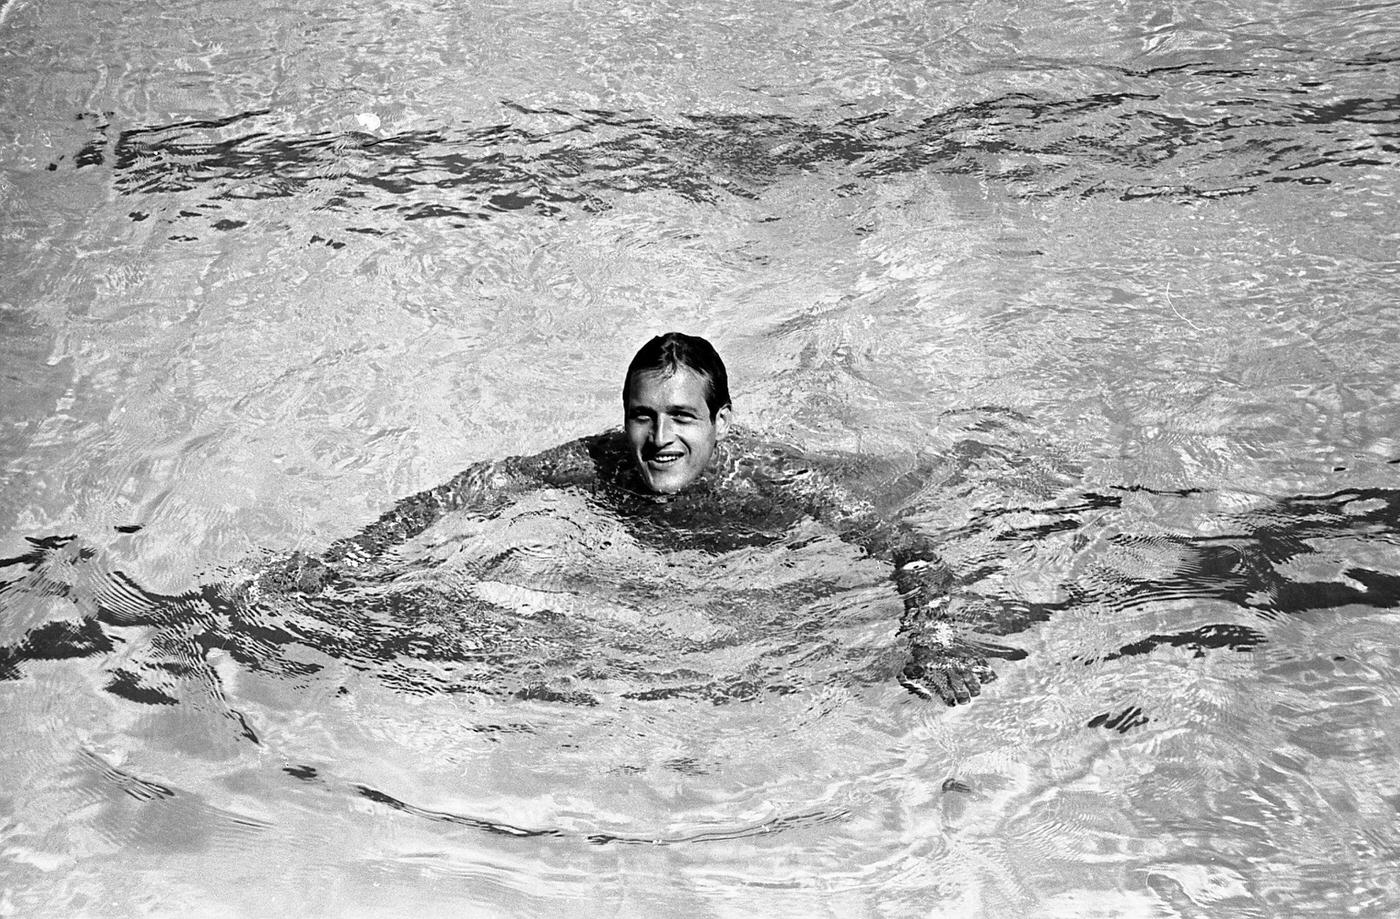 Actor Paul Newman relaxes swimming after filming "Exodus" in Israel, 1959.